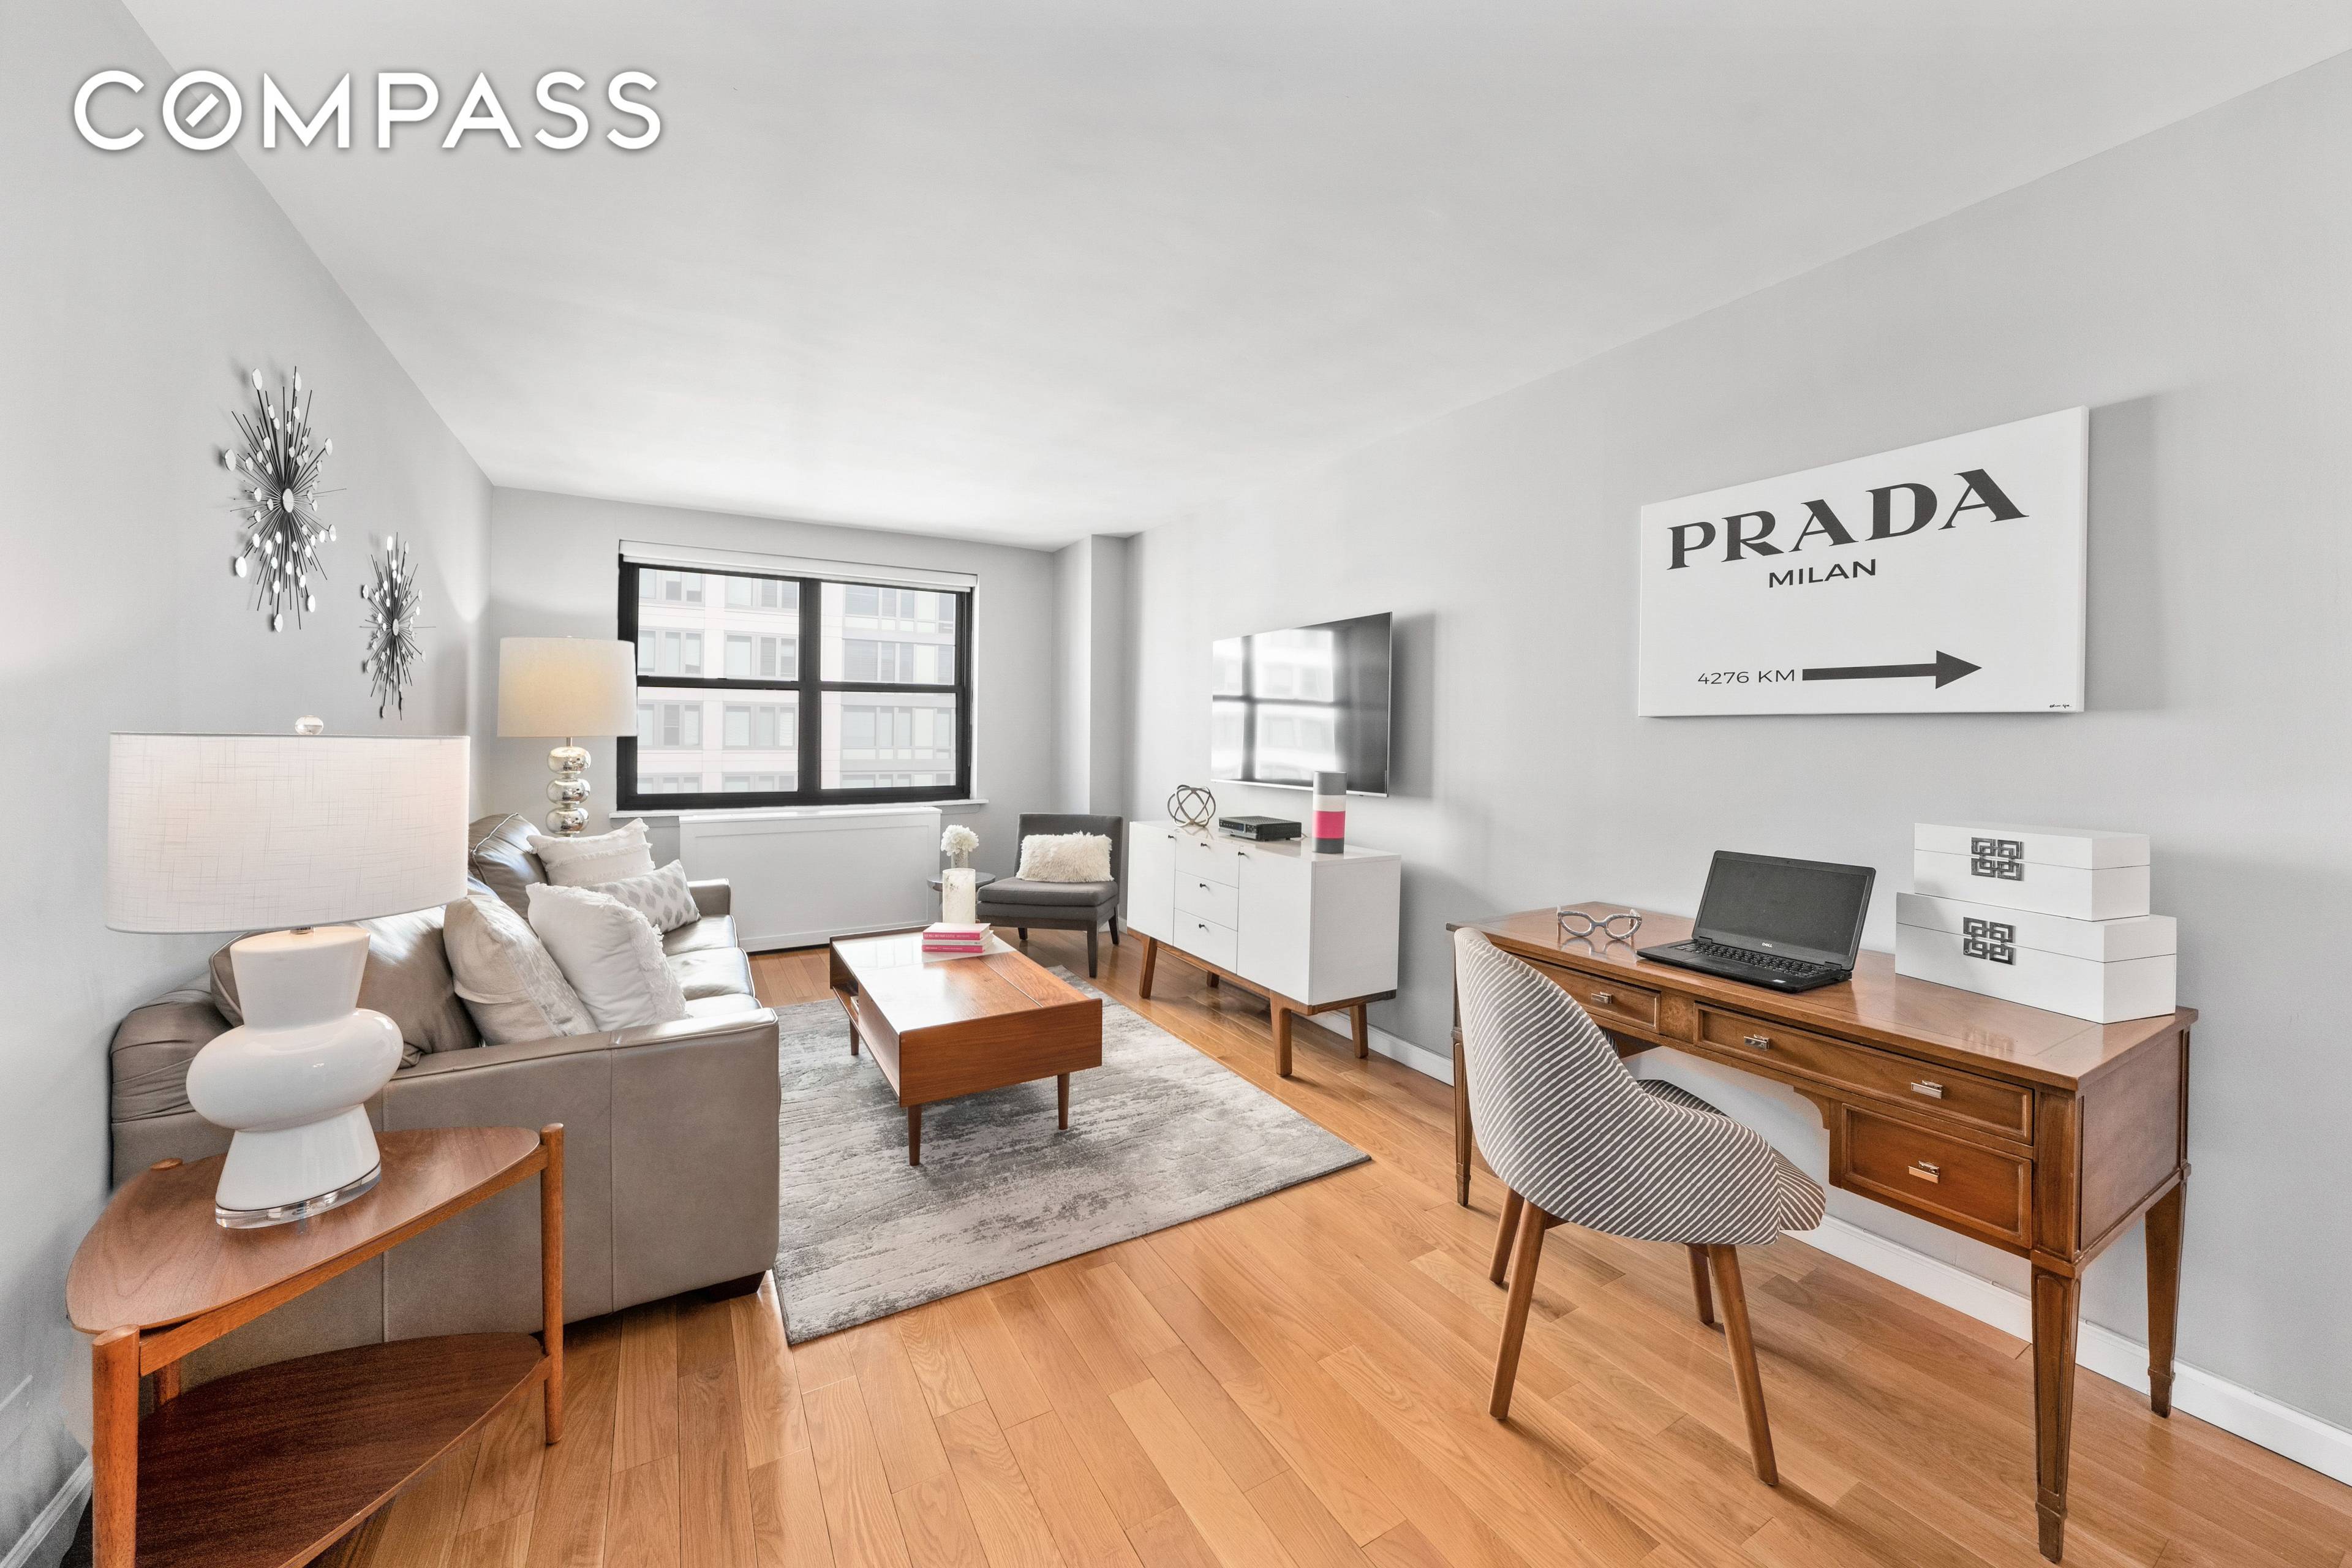 This completely renovated high floor one bedroom, one bathroom impresses with spacious designer interiors and excellent storage in a full service downtown co op.